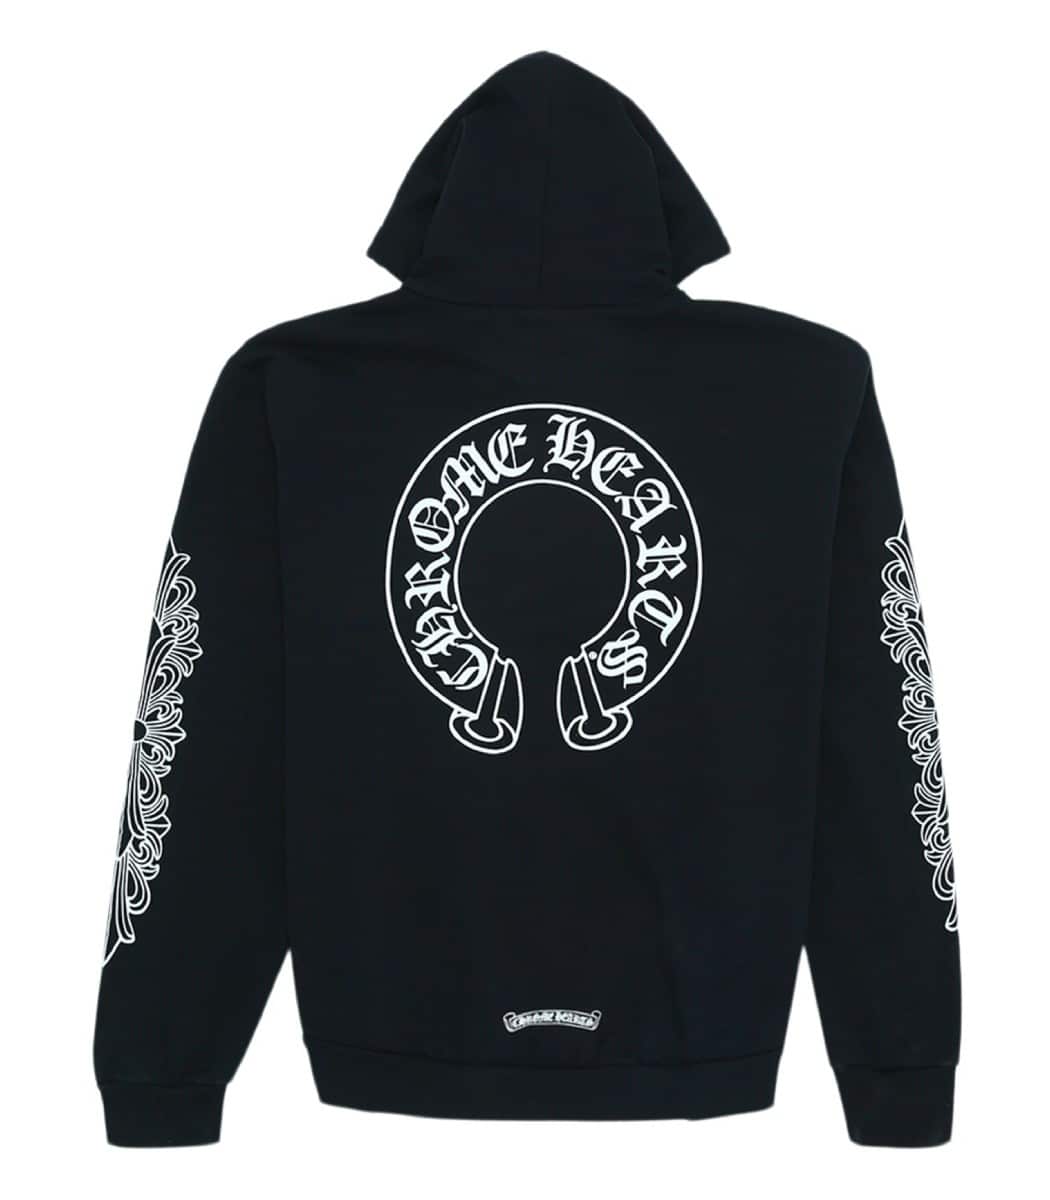 Chrome Hearts Horse Shoe Floral Hoodie - Black - Upto 30% Off